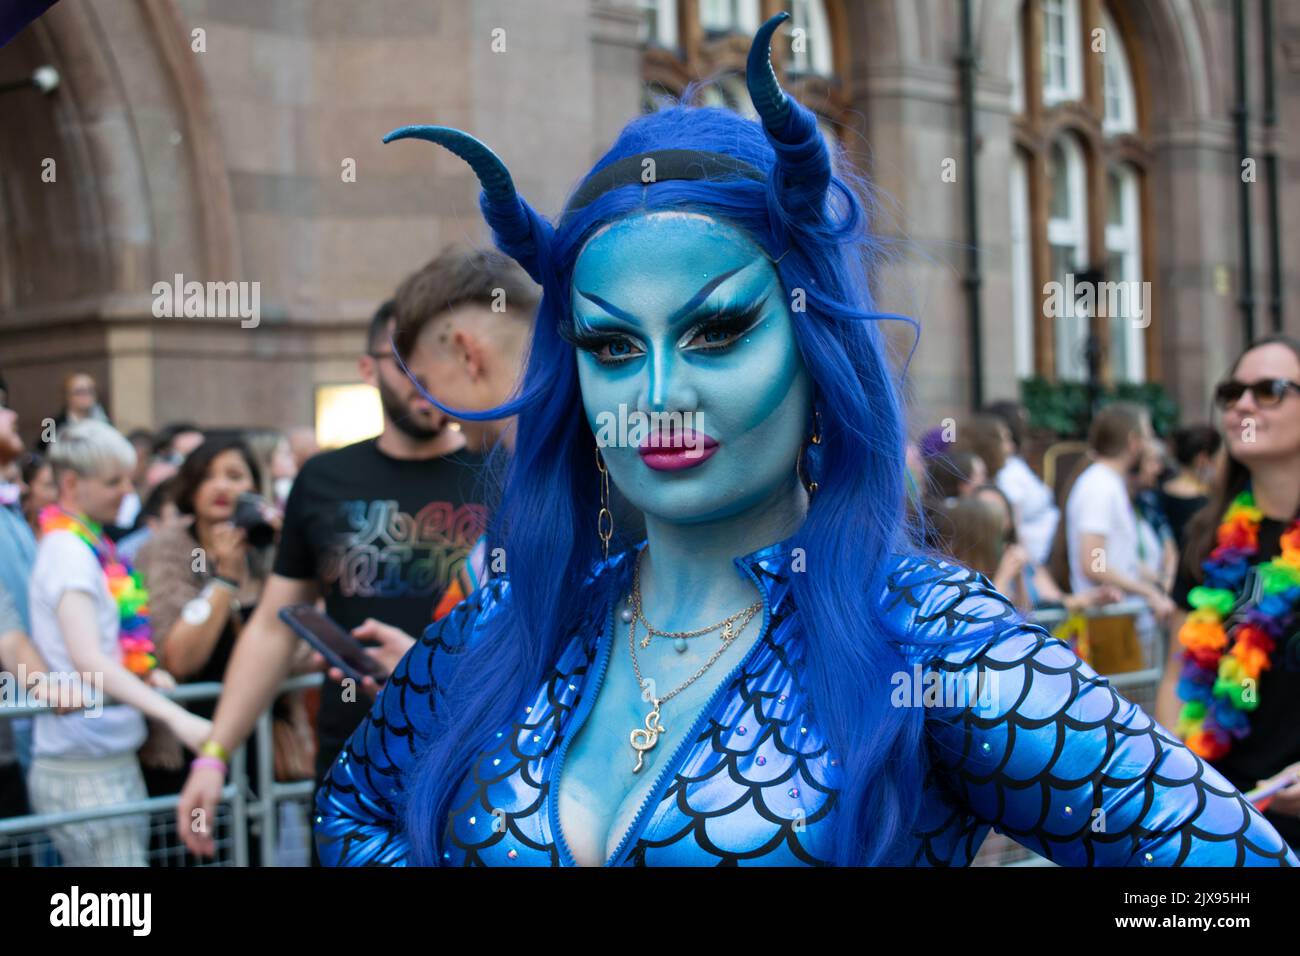 Manchester Pride parade. Woman in blue snake costume. Theme March for Peace. Stock Photo